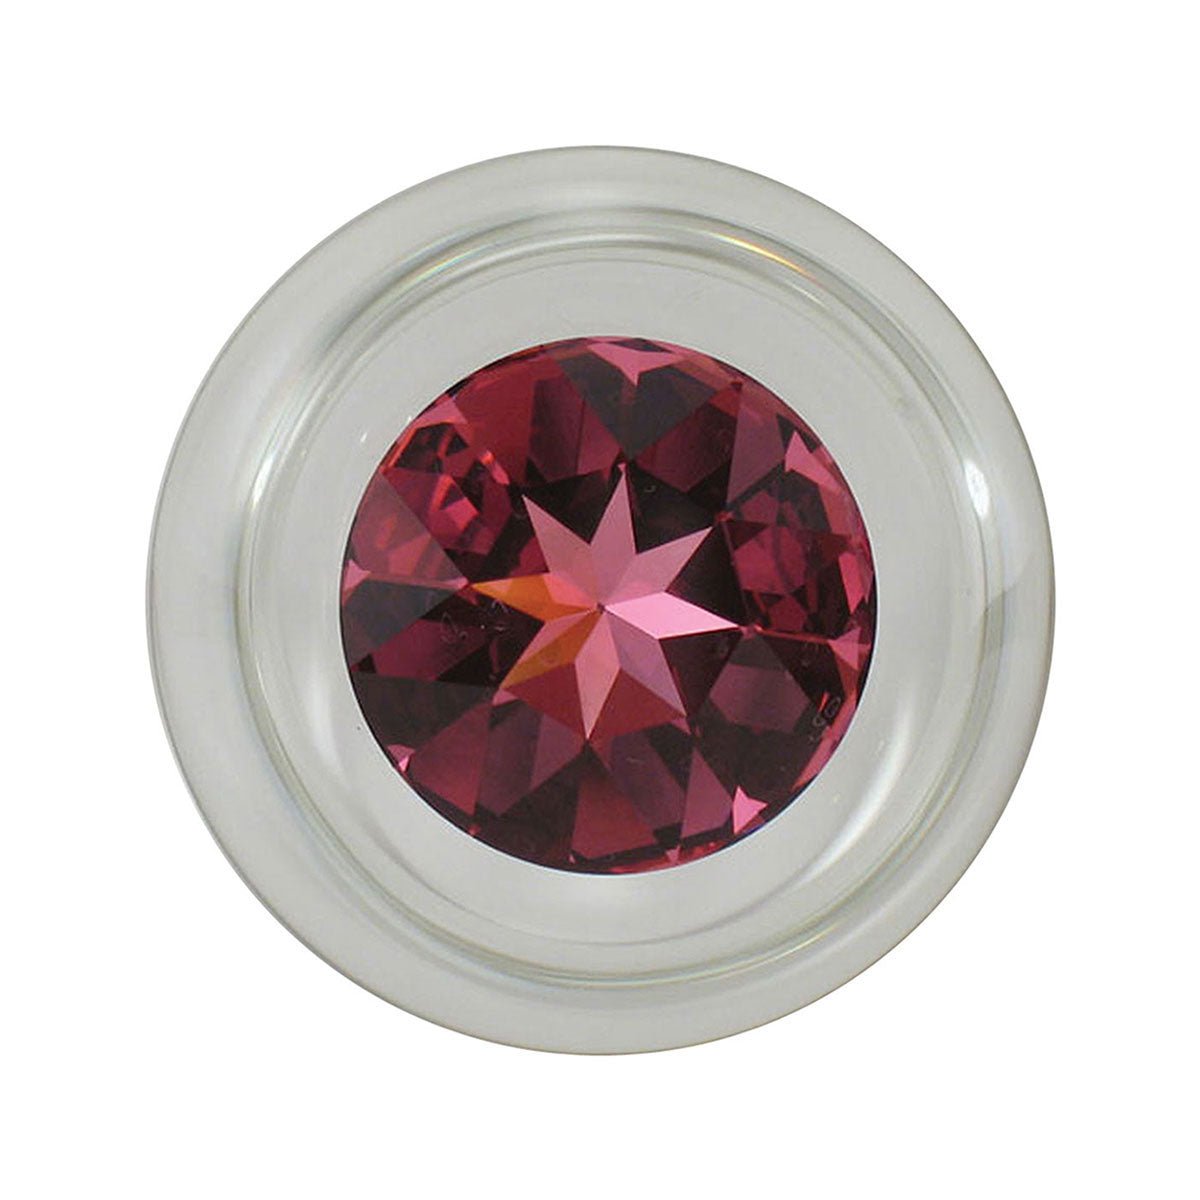 Crystal Delights Small Clear Plug - Pink Plugs